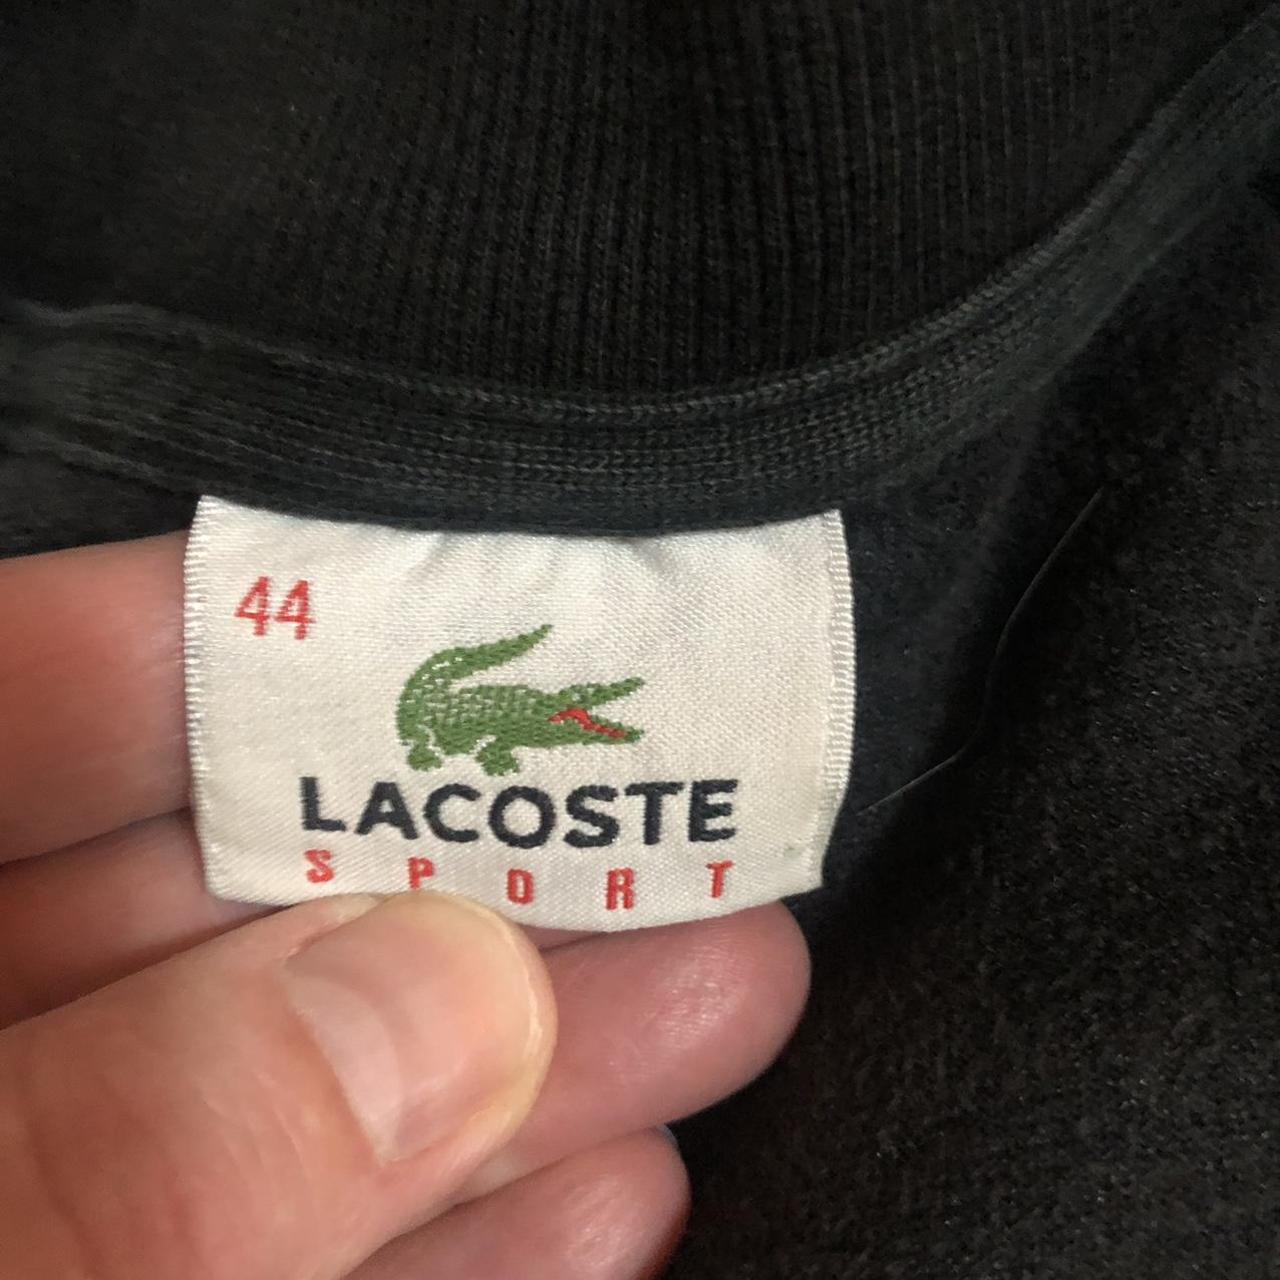 LACOSTE VELOUR FULL ZIP TRACK Top - Size 44 Fits... - Depop